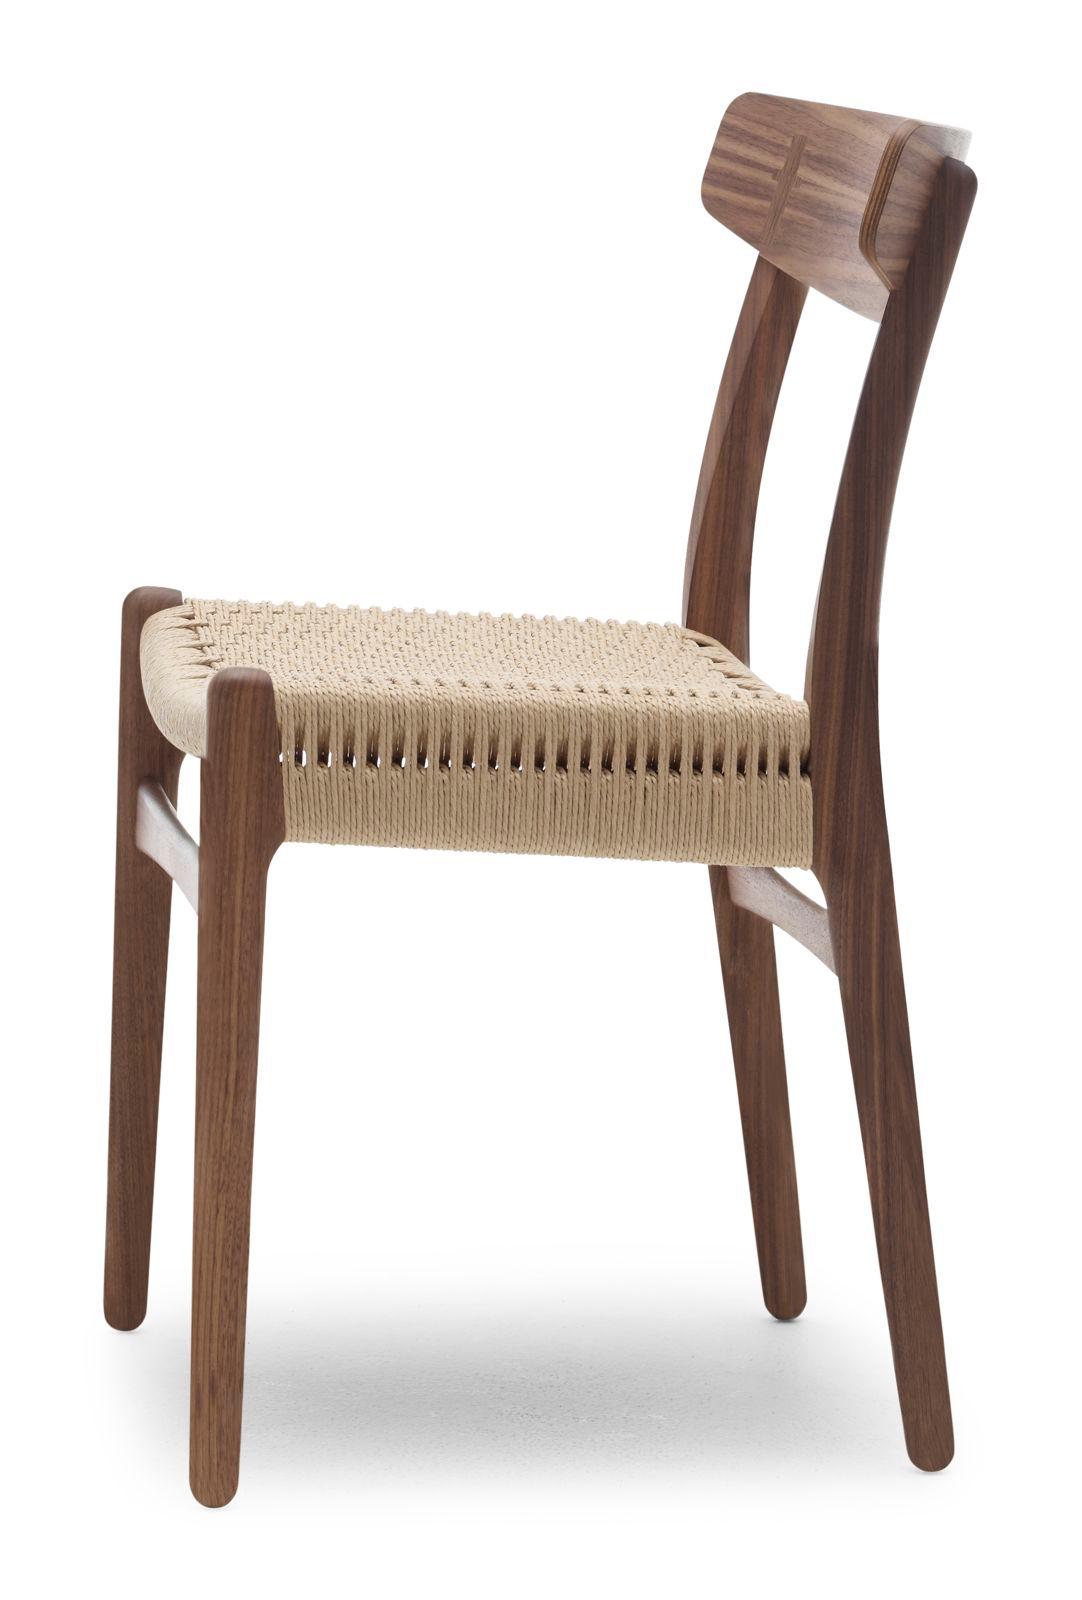 First introduced in 1950, the CH23 dining chair features clean, organic contours and refined styling, demonstrating young Hans J. Wegner’s unique design approach and insightful craftsmanship.